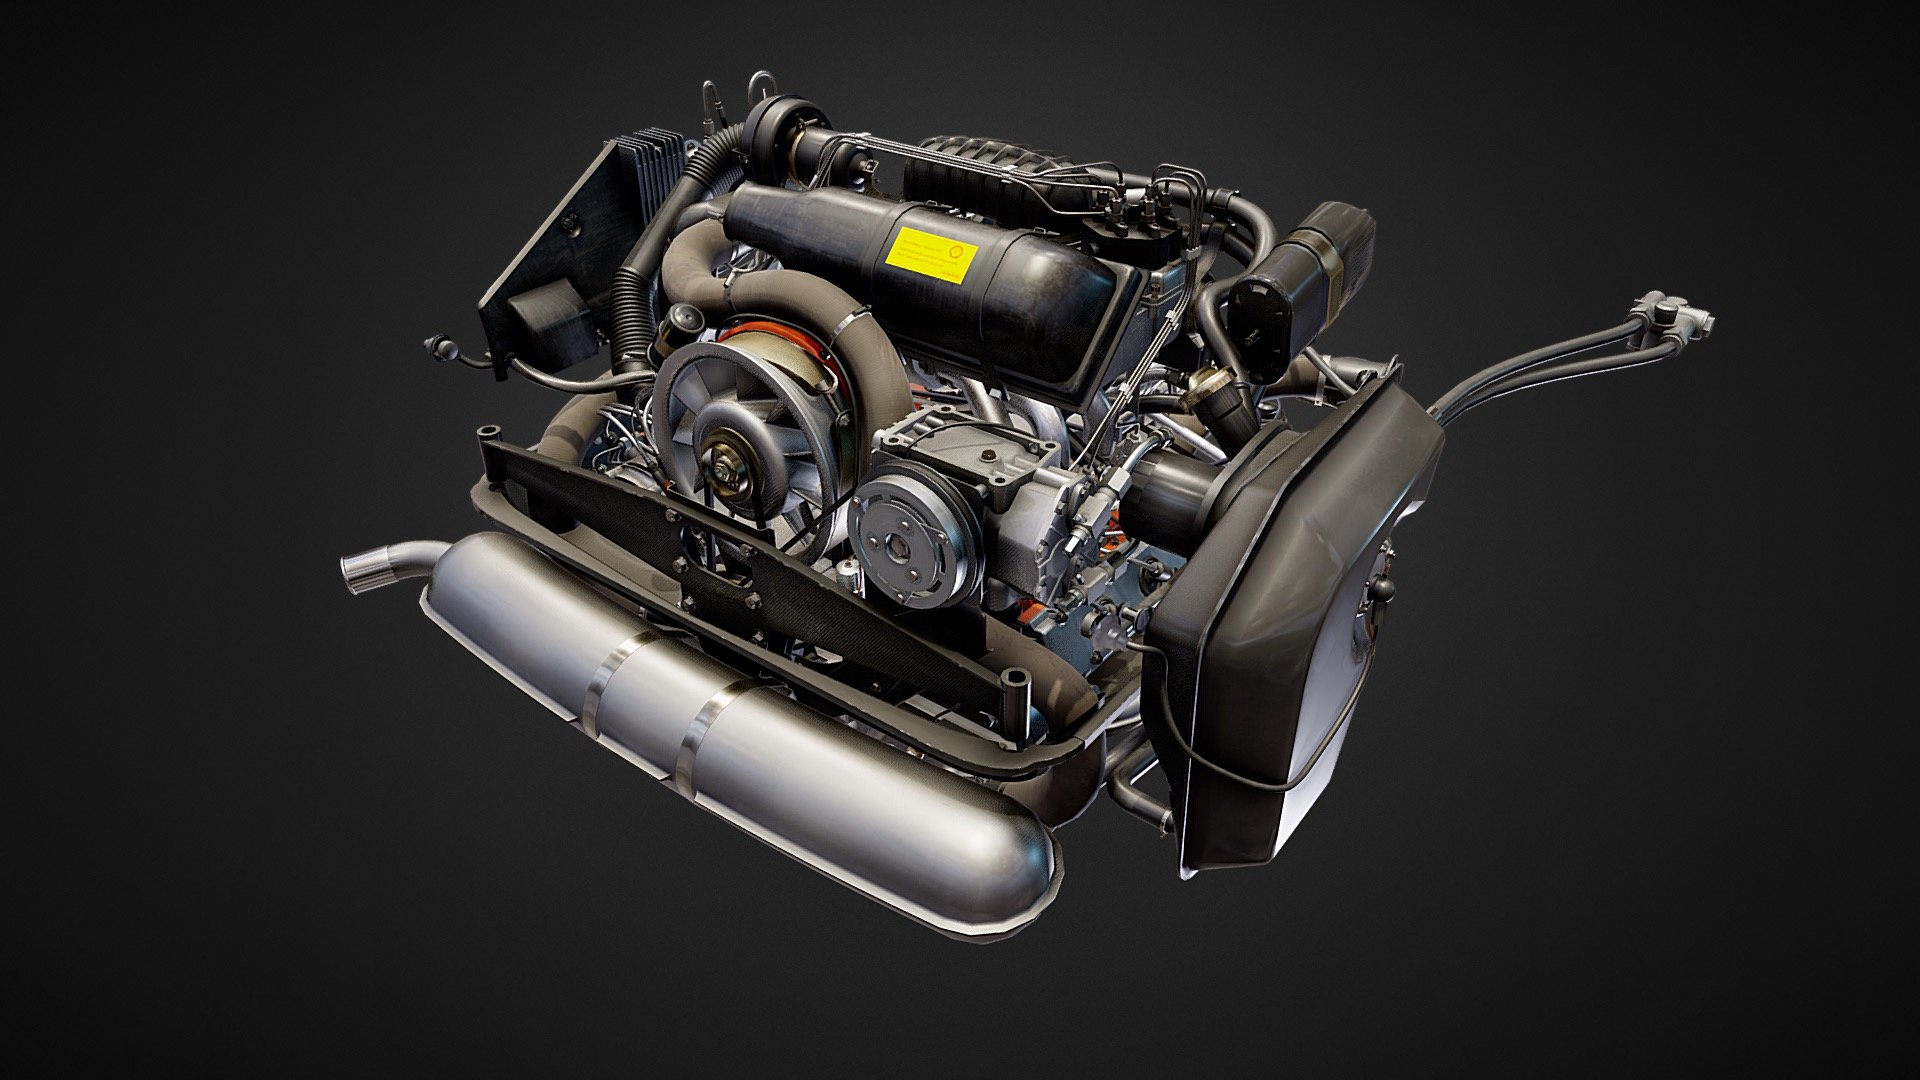 An attempt to recreate the famous Flat Six Engine digitally. This one here is the 3.0 l from 1983. It's a part of a full 911SC. The model is accurate, includes all the engine parts (hopefully I didn't miss anything). I added some annotations so you can scroll among the parts. 
If you find something missing or not correct, please let me know, I'll try to fix it. 

You can find the mentioned complete 911SC model here: 
https://sketchfab.com/3d-models/911sc-25c89107845b4155bfb6ee6cfc087a22 - Porsche 911 SC Engine with 915 Gearbox - Buy Royalty Free 3D model by PROKOP (@davidgulla) 3d model